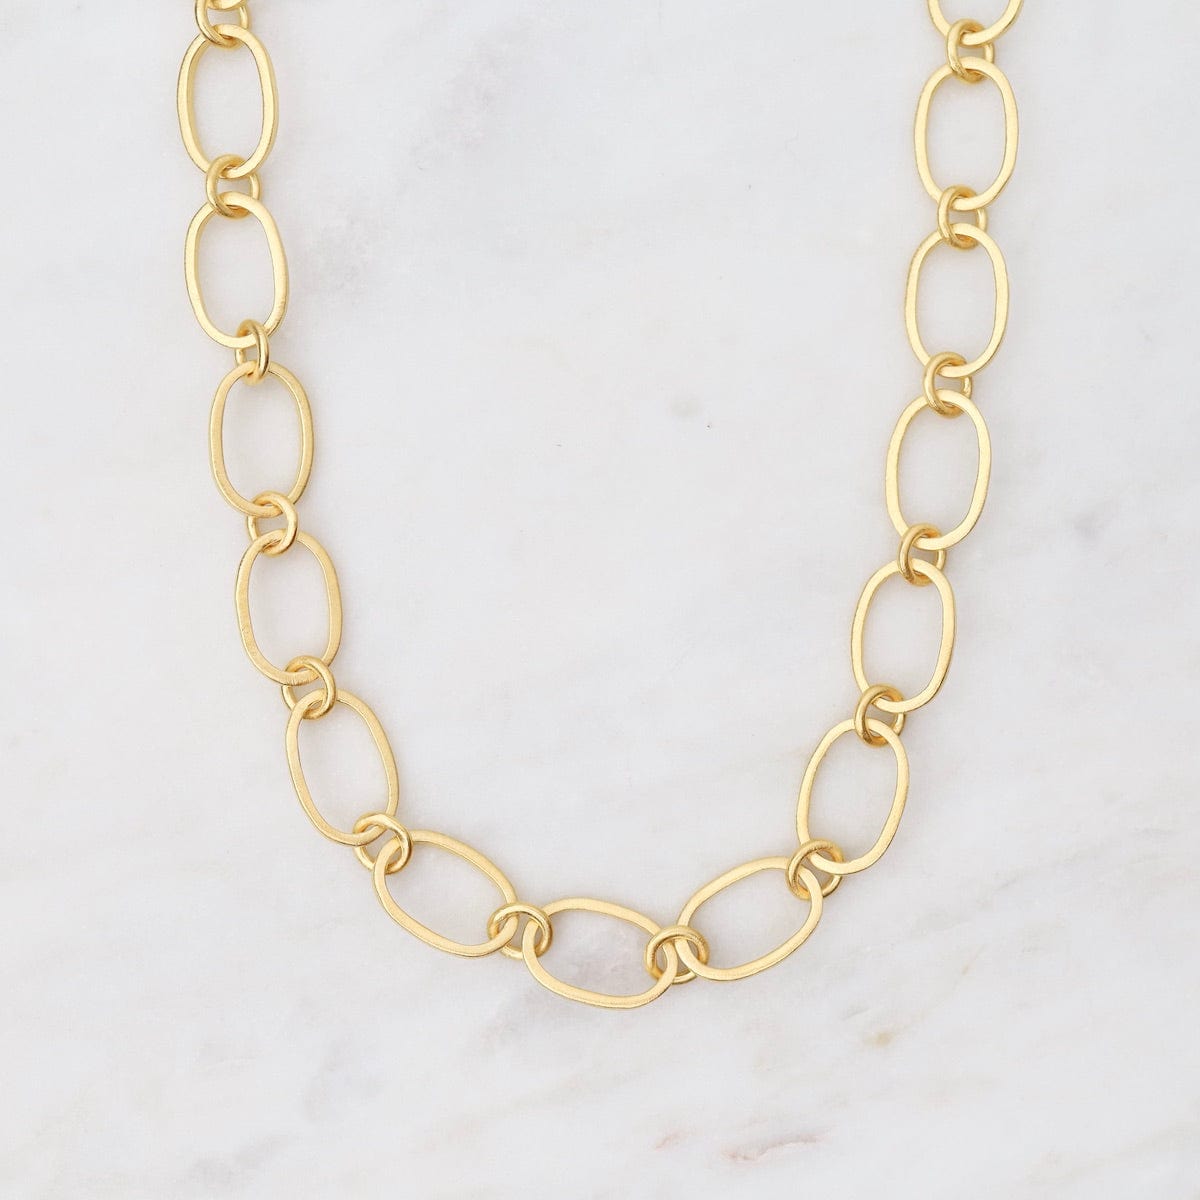 NKL-GPL Gold Oval Link Chain